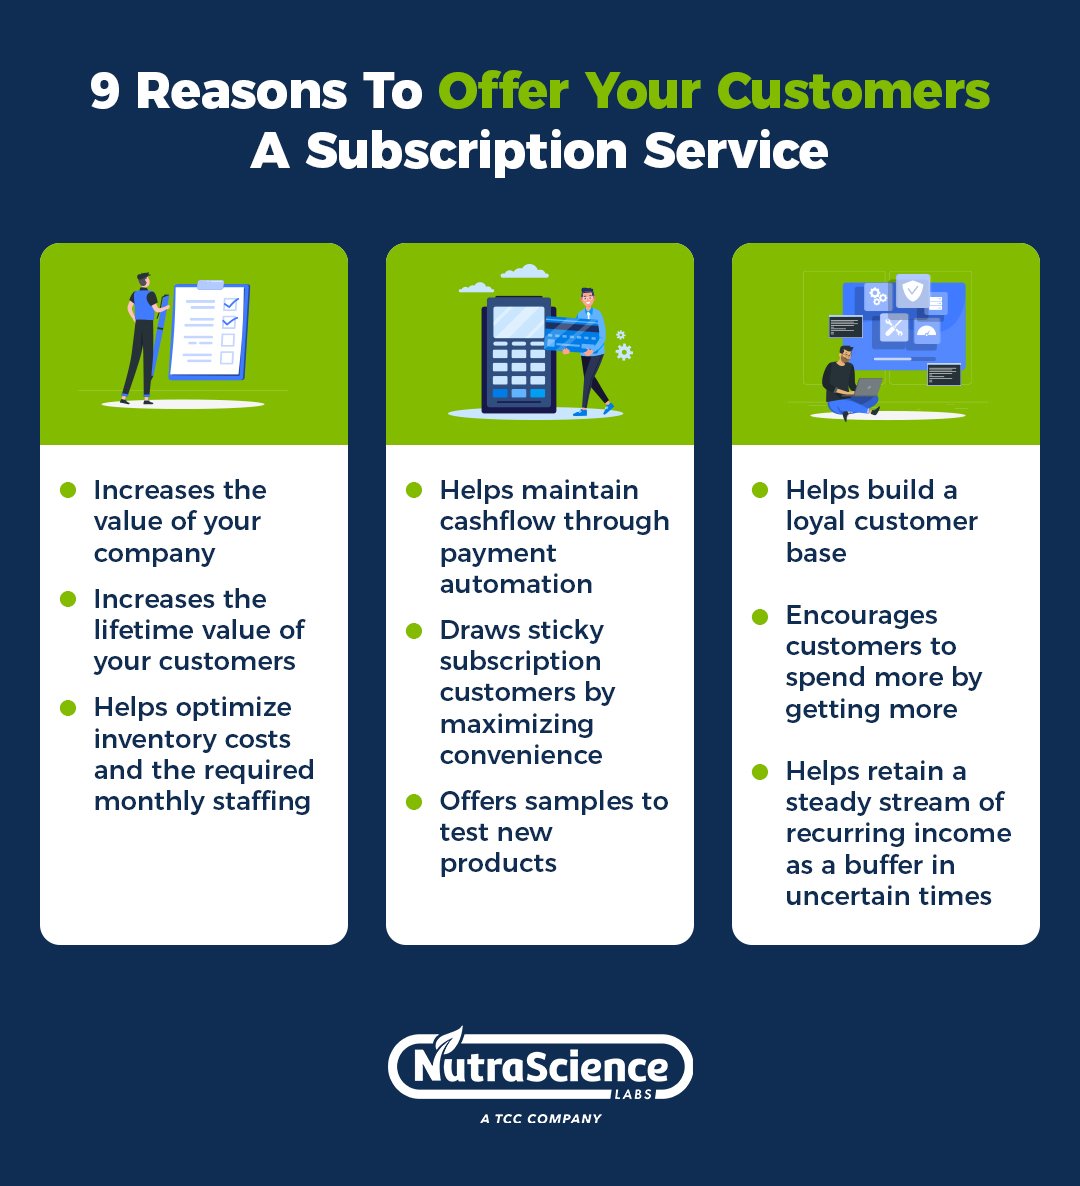 9 Reasons To Offer Your Customers A Subscription Service